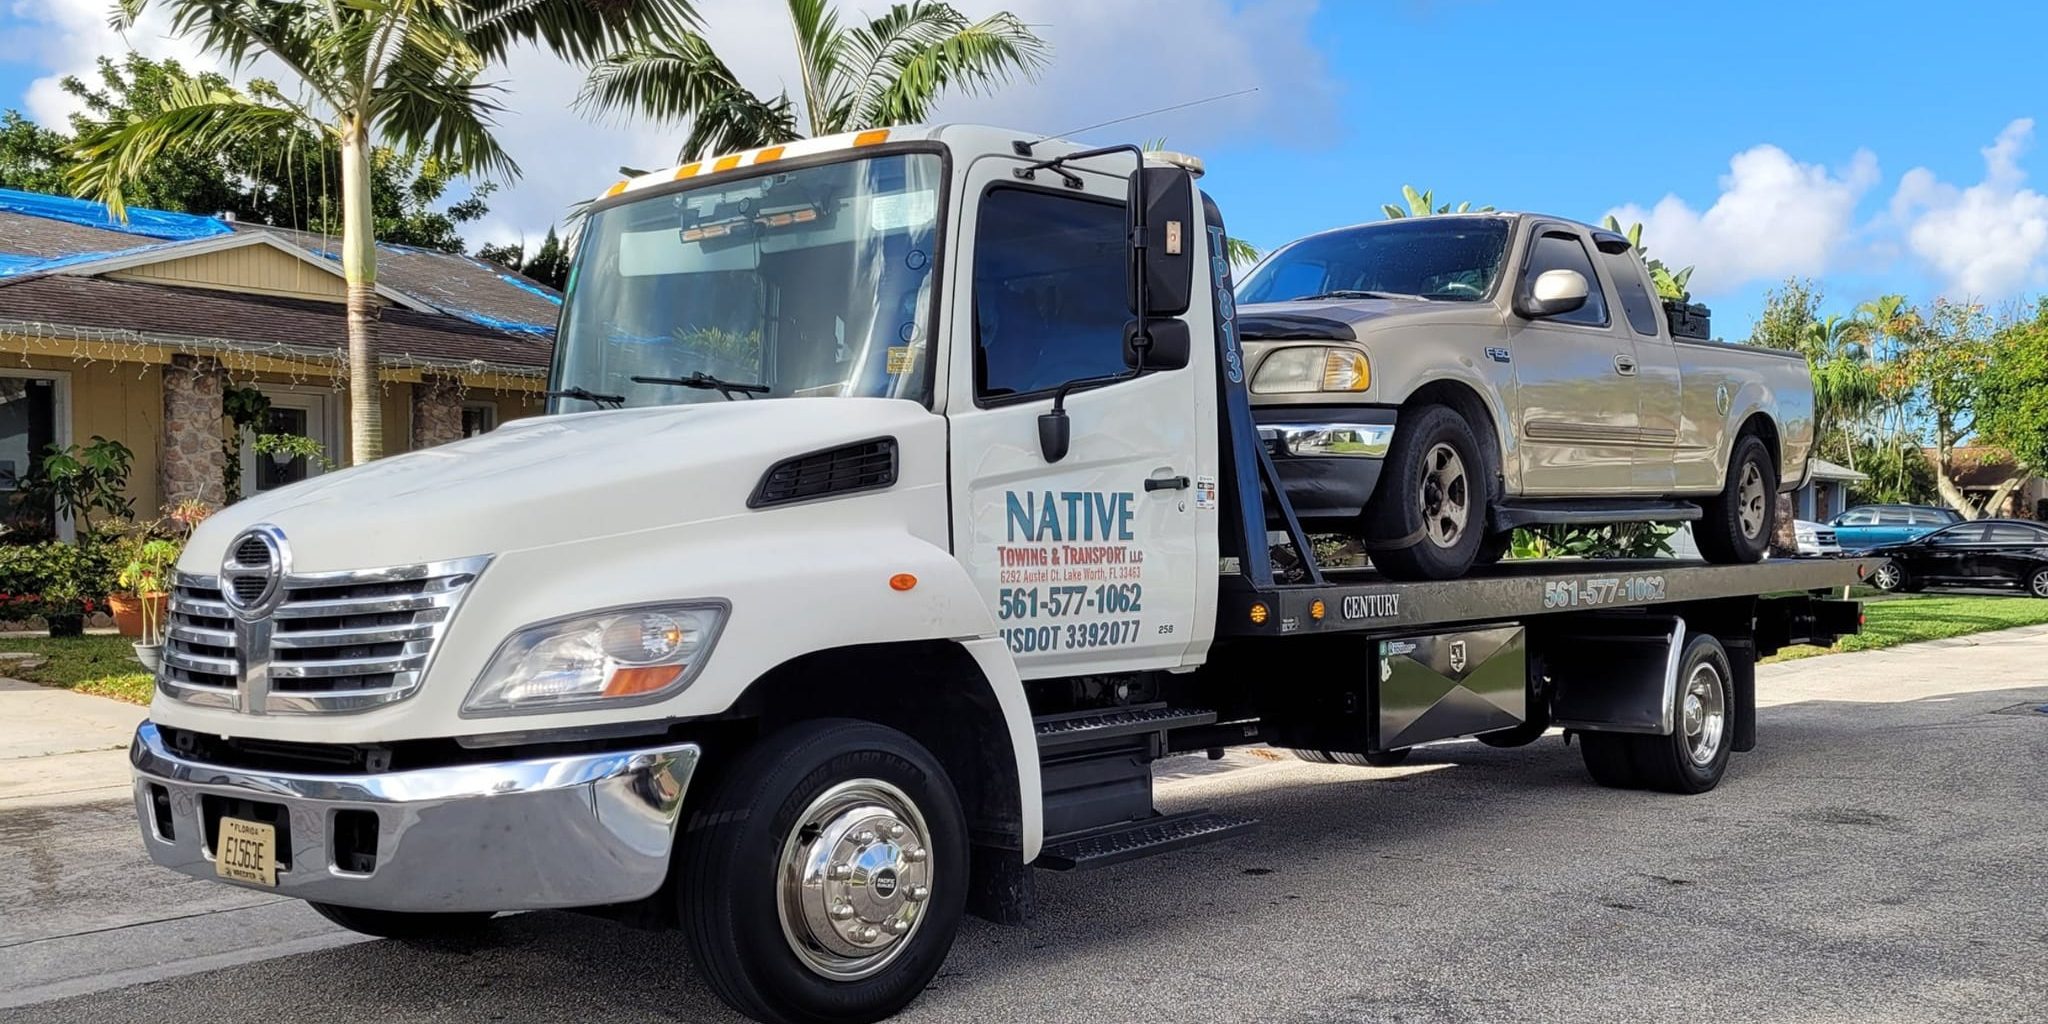 Tow Truck Service To Local Auto Repair Shop